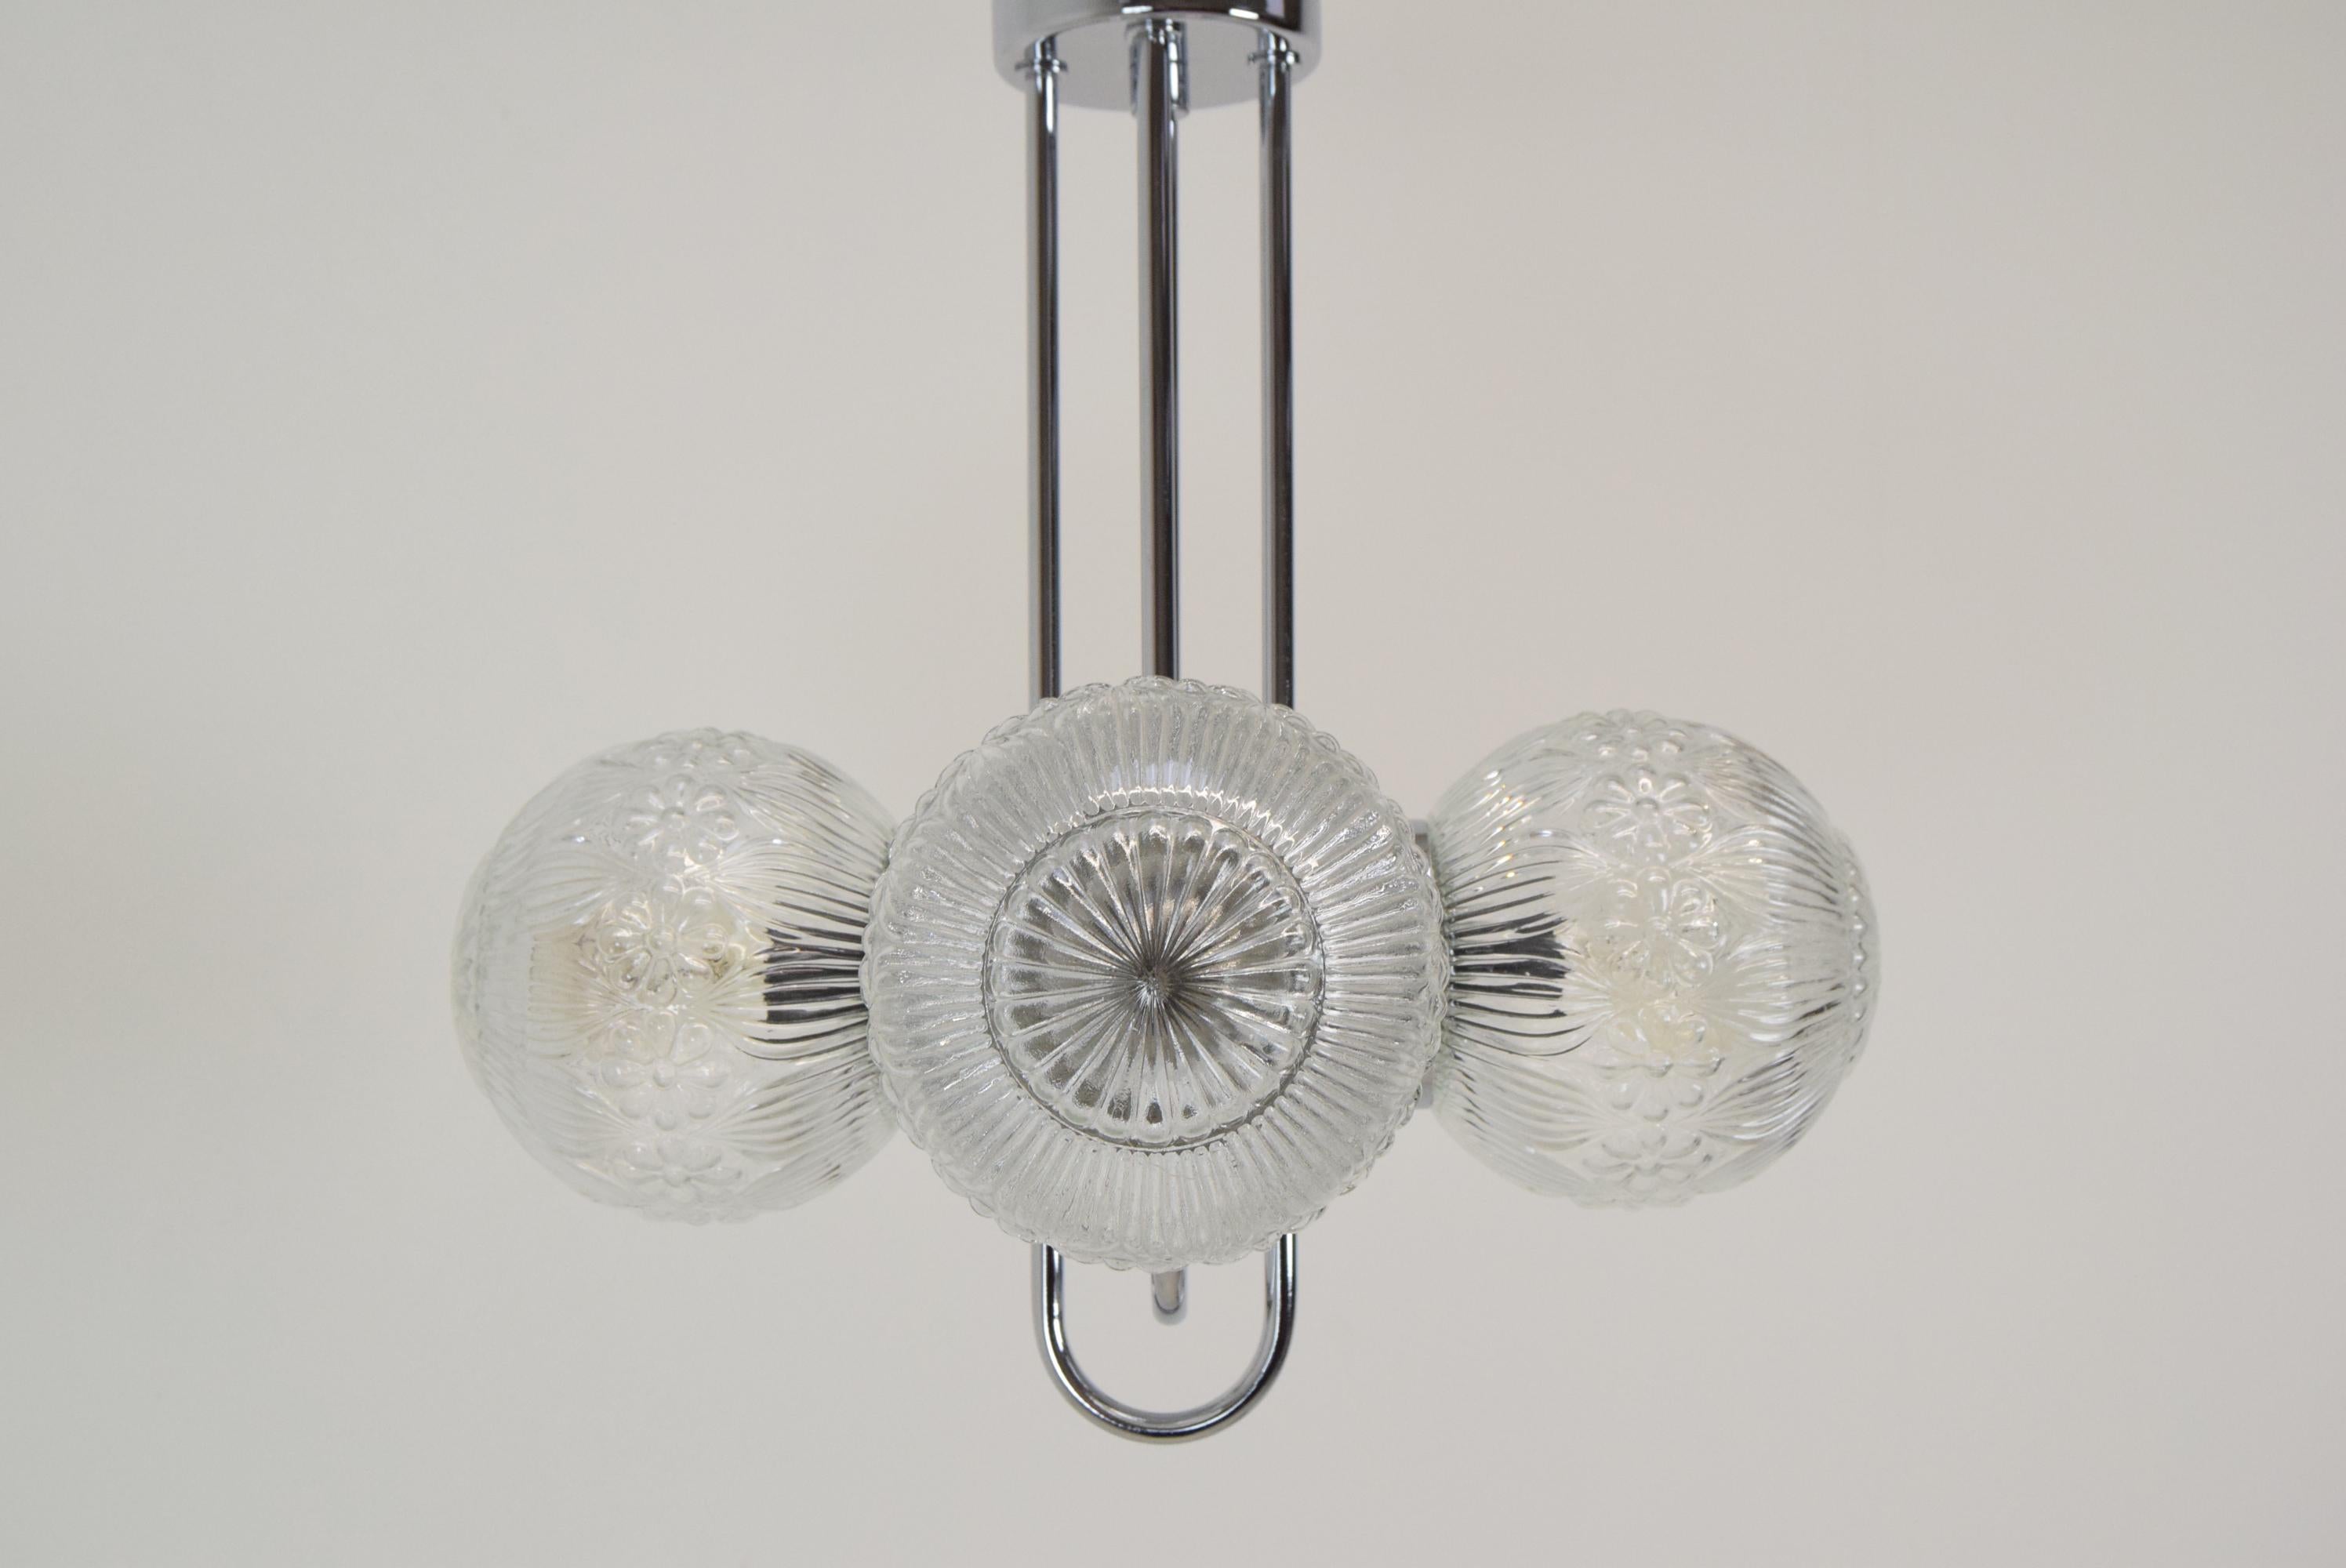 Pair of Mid-Century Chrome Chandeliers by Instala Decin, 1970s For Sale 2